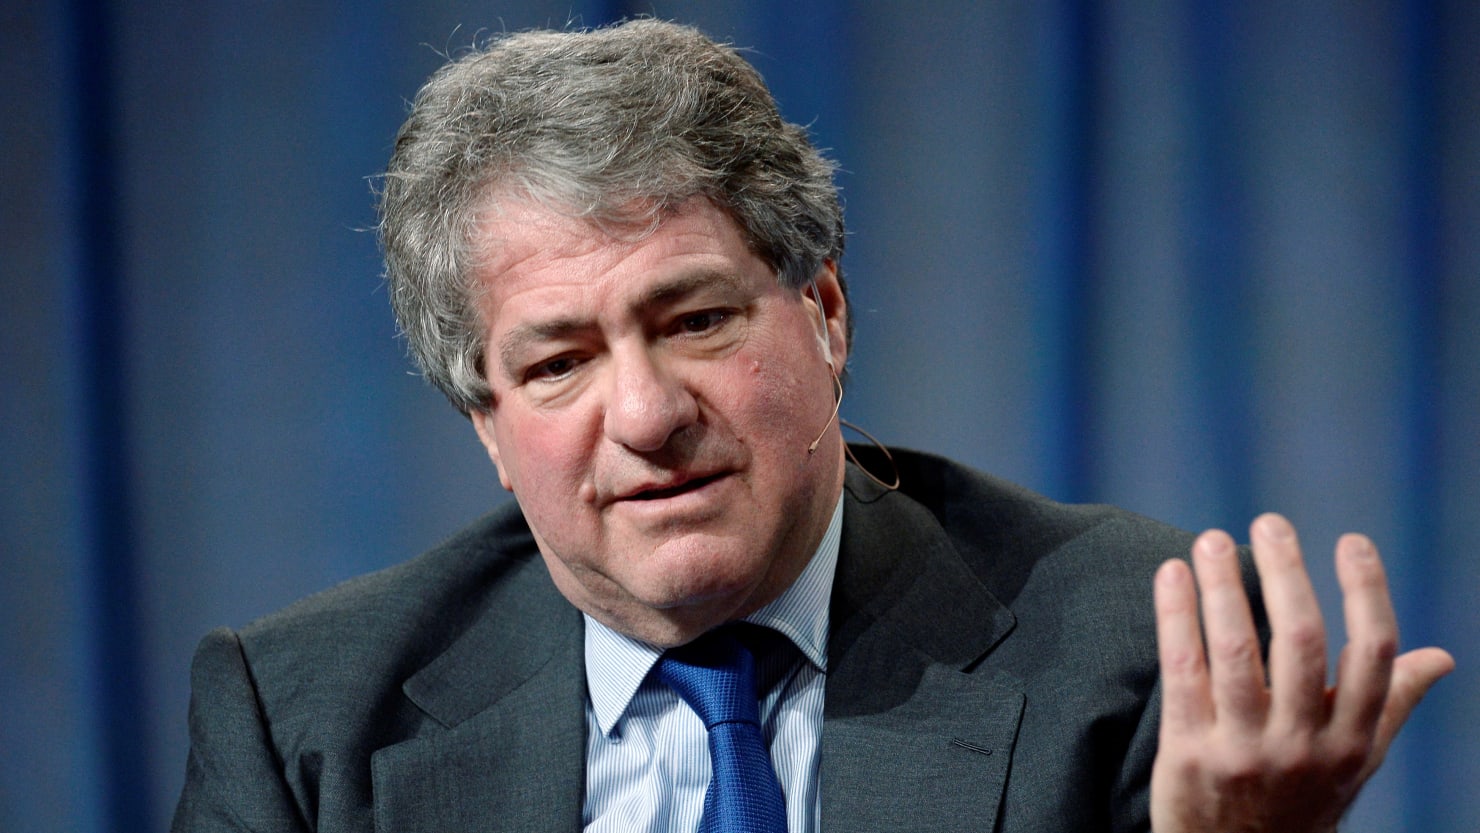 Leon Black’s accusers kicked her lawyer to the curb.